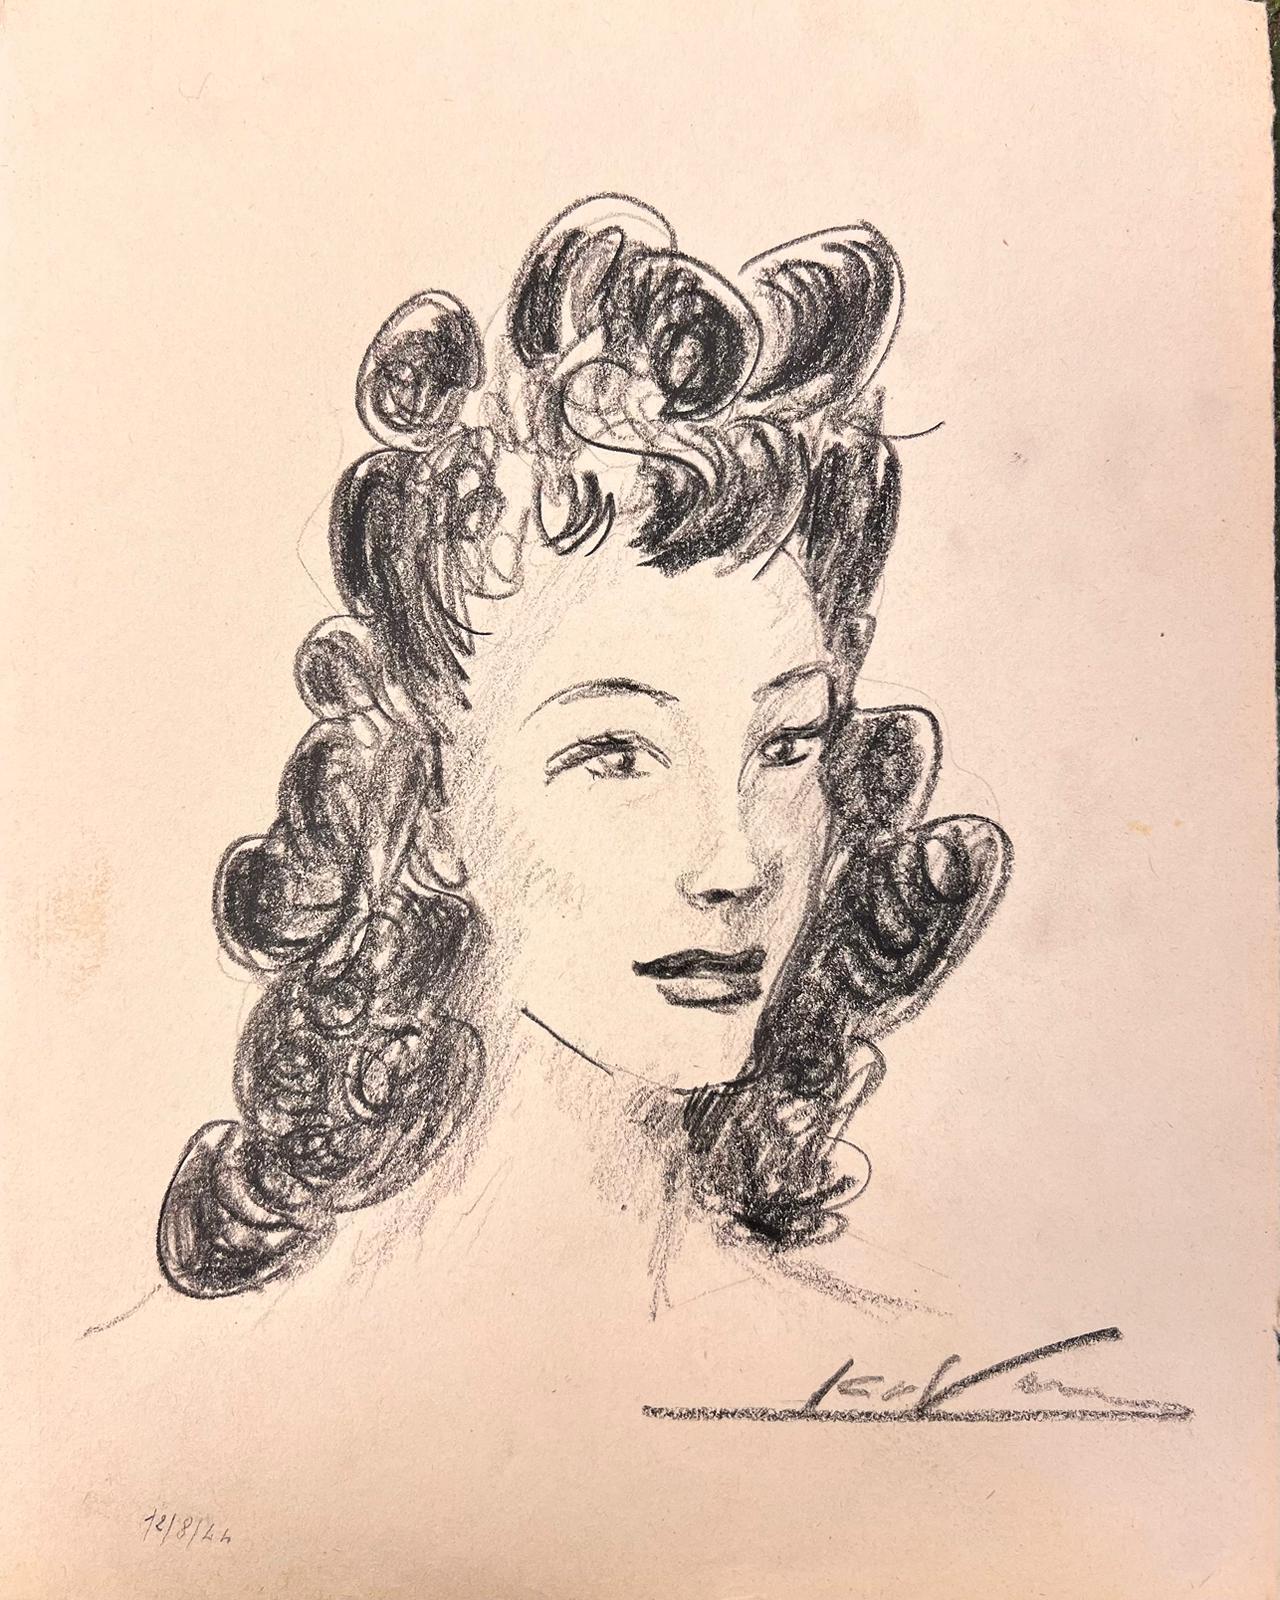 1950’s Fashion Illustration Original Portrait Of A Lady With Black Curly Hair